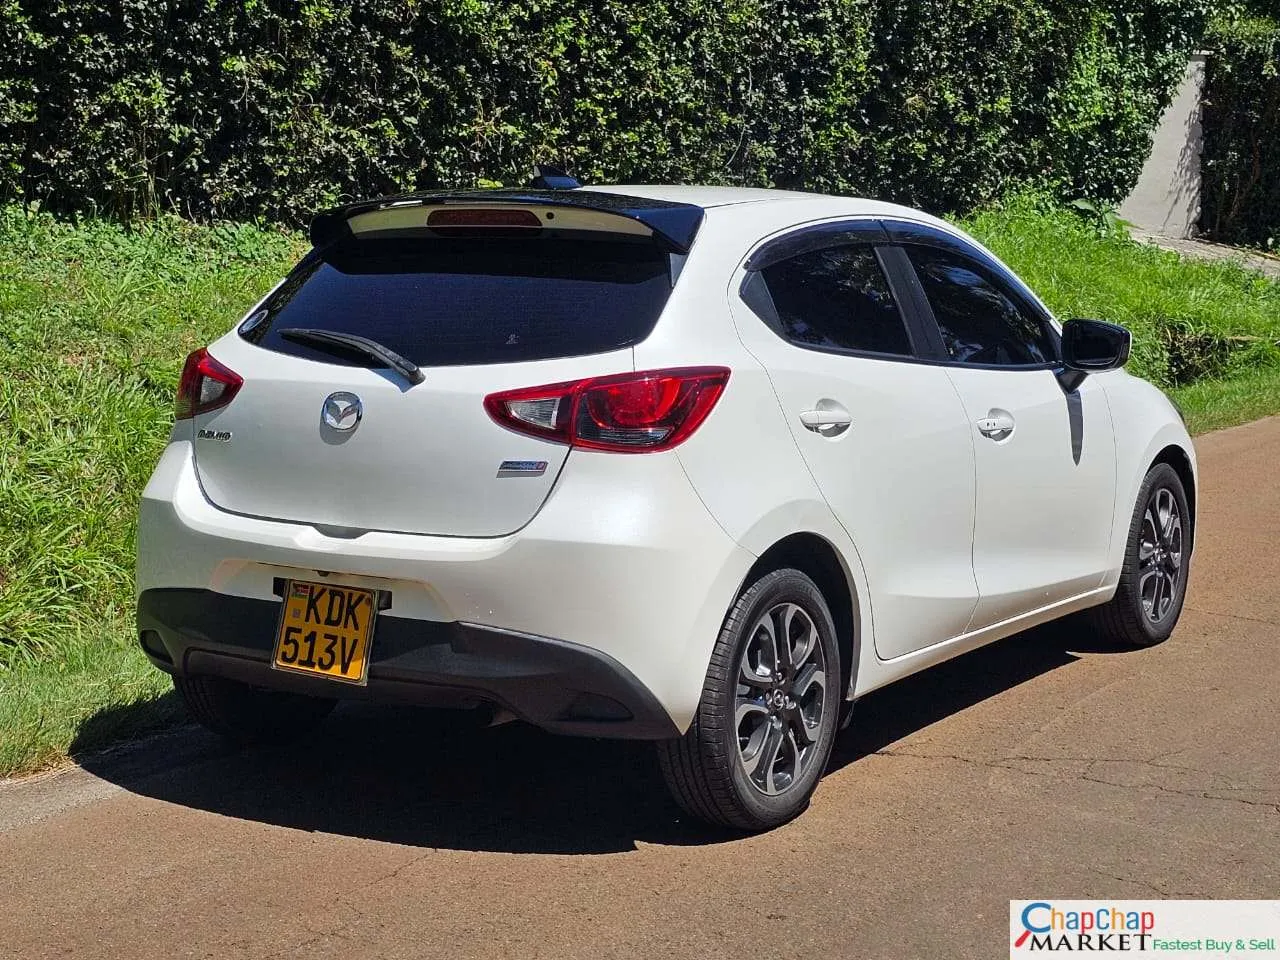 Mazda Demio 🔥 NEWEST SHAPE You Pay 30% DEPOSIT TRADE IN OK EXCLUSIVE Hire purchase installments 🔥